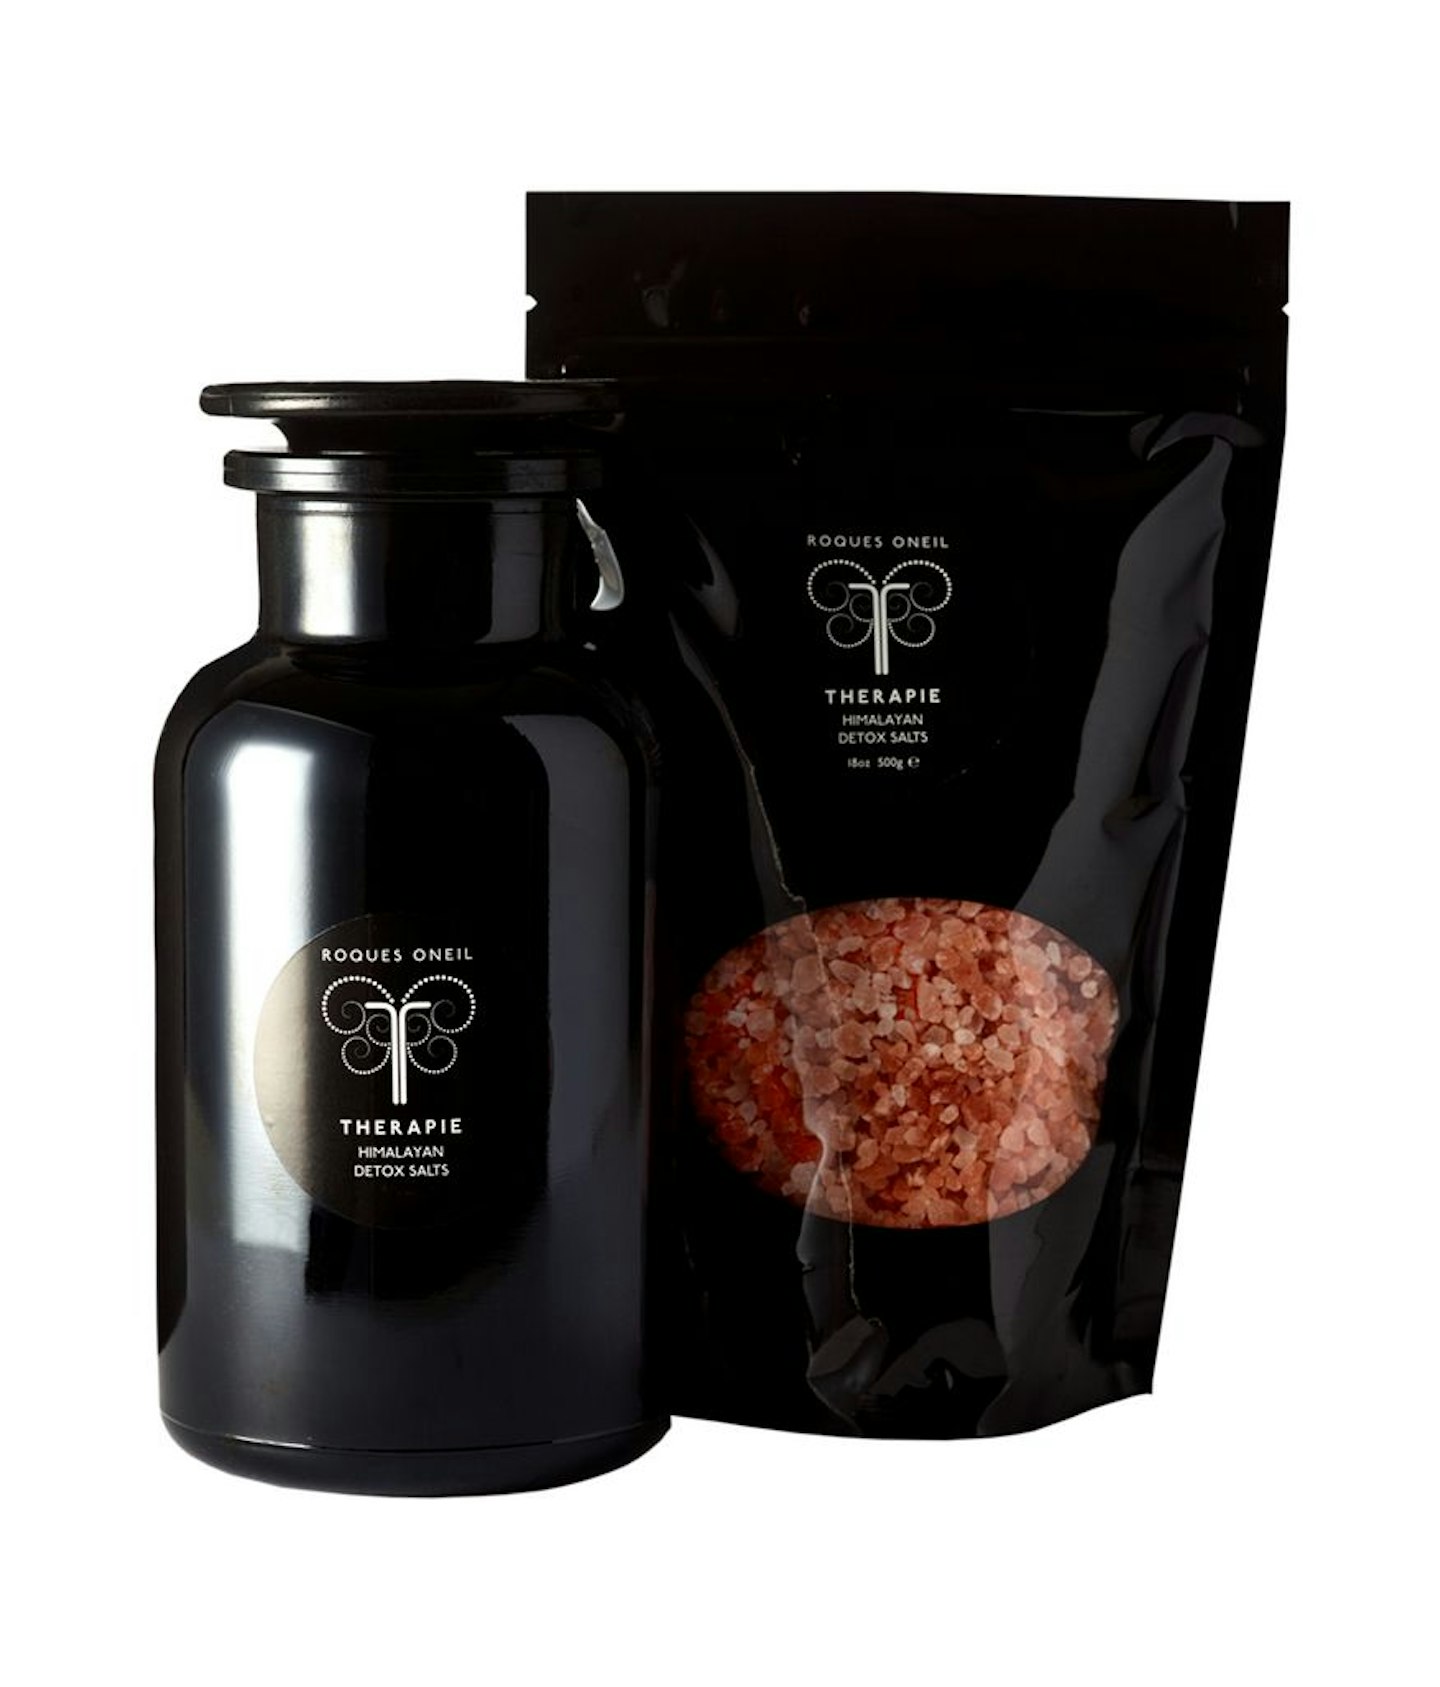 Michelle Roques Ou2019Neil Special Edition Apothecary Jar Himalayan Detox Salts, £52